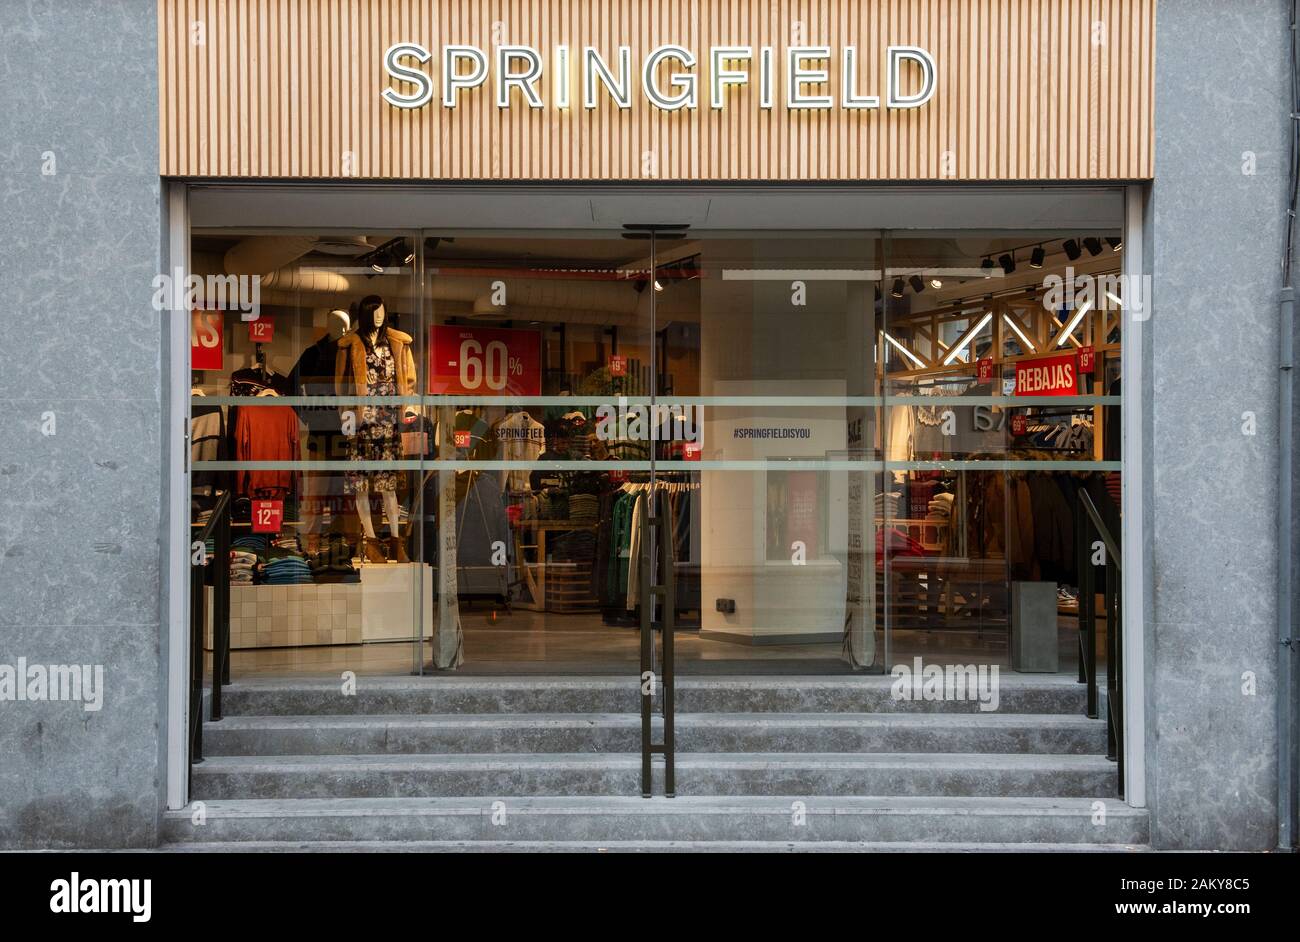 Wederzijds Plagen Afgeschaft One of the leading Spanish fashion retailers brand owned by Tendam,  Springfield, store seen in Spain Stock Photo - Alamy